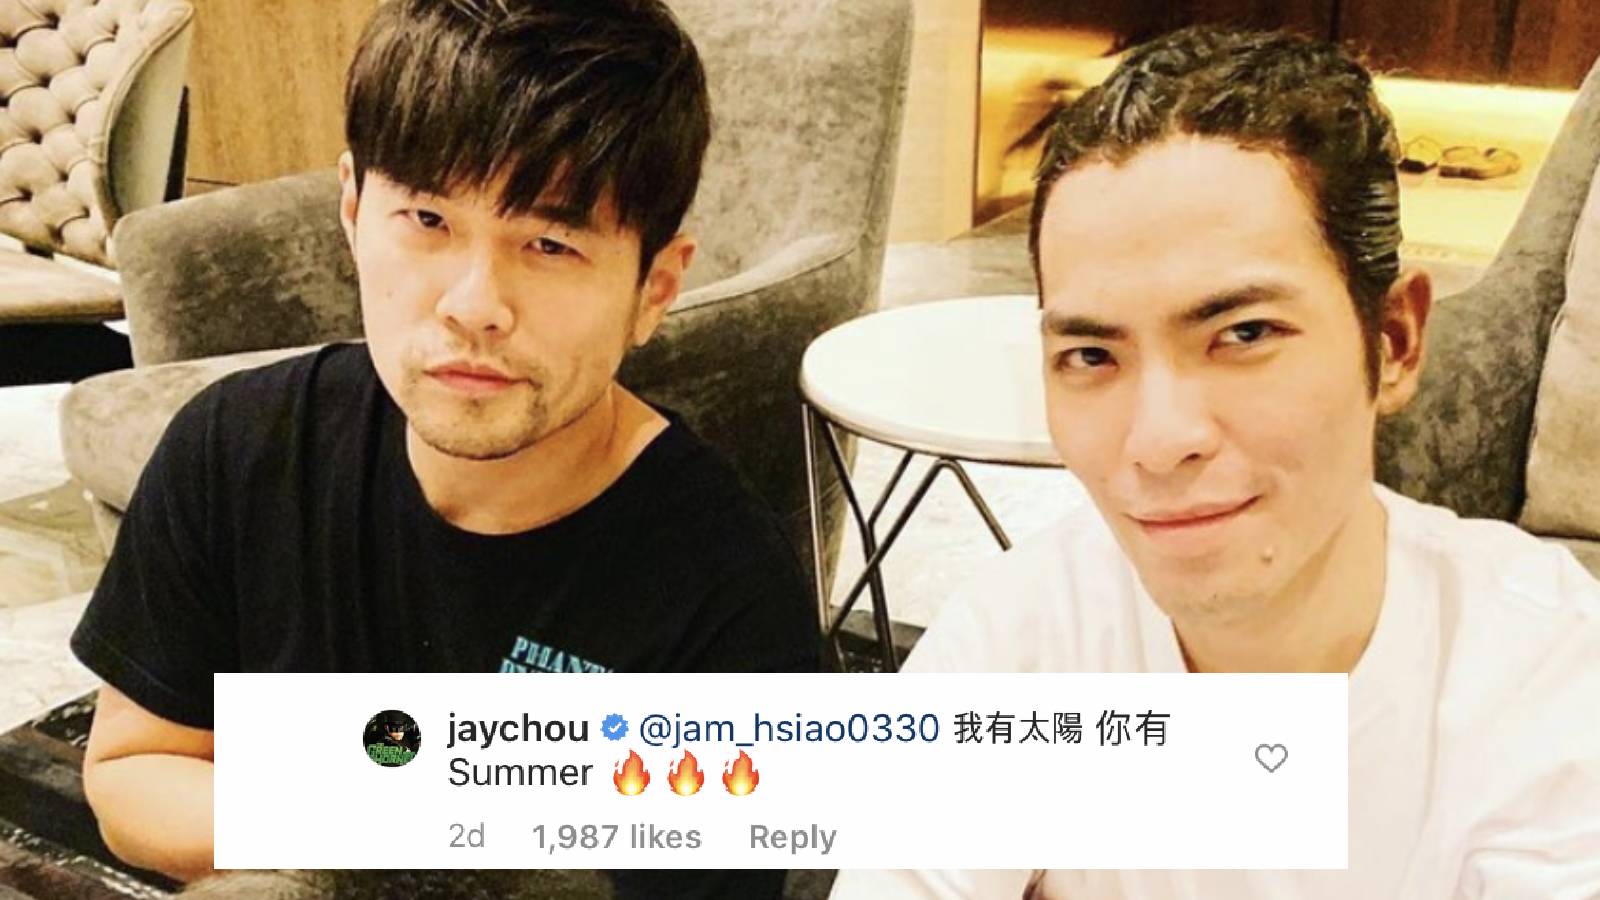 Jay Chou Teases Jam Hsiao About His Rumoured Relationship With His Longtime Manager